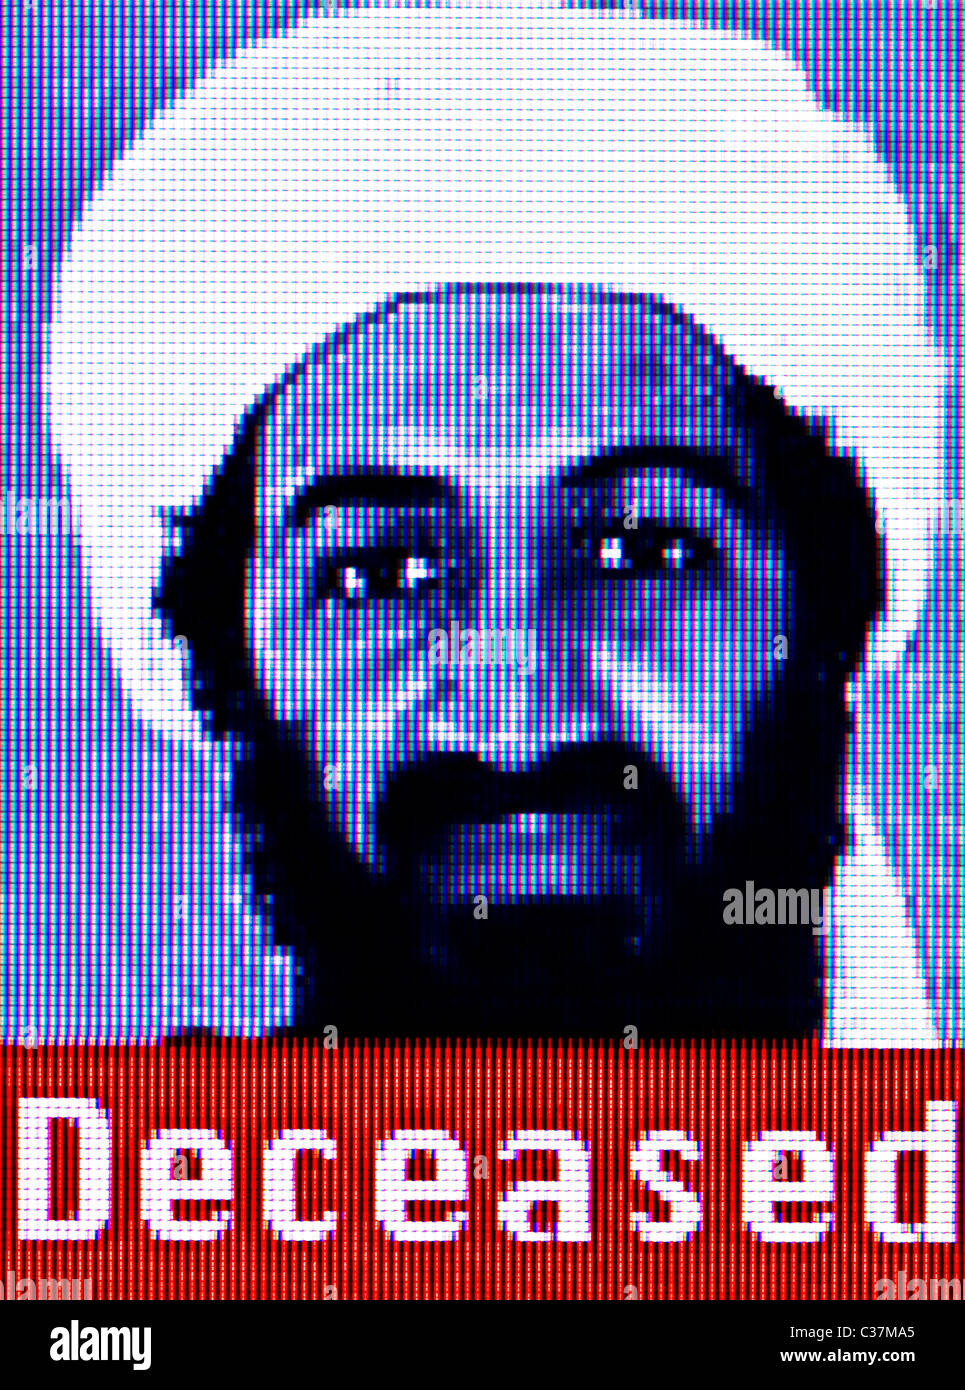 Updated mugshot of Osama Bin Laden on the FBI's Most Wanted website following his death at the hands of US Navy Seals in 2011. Stock Photo